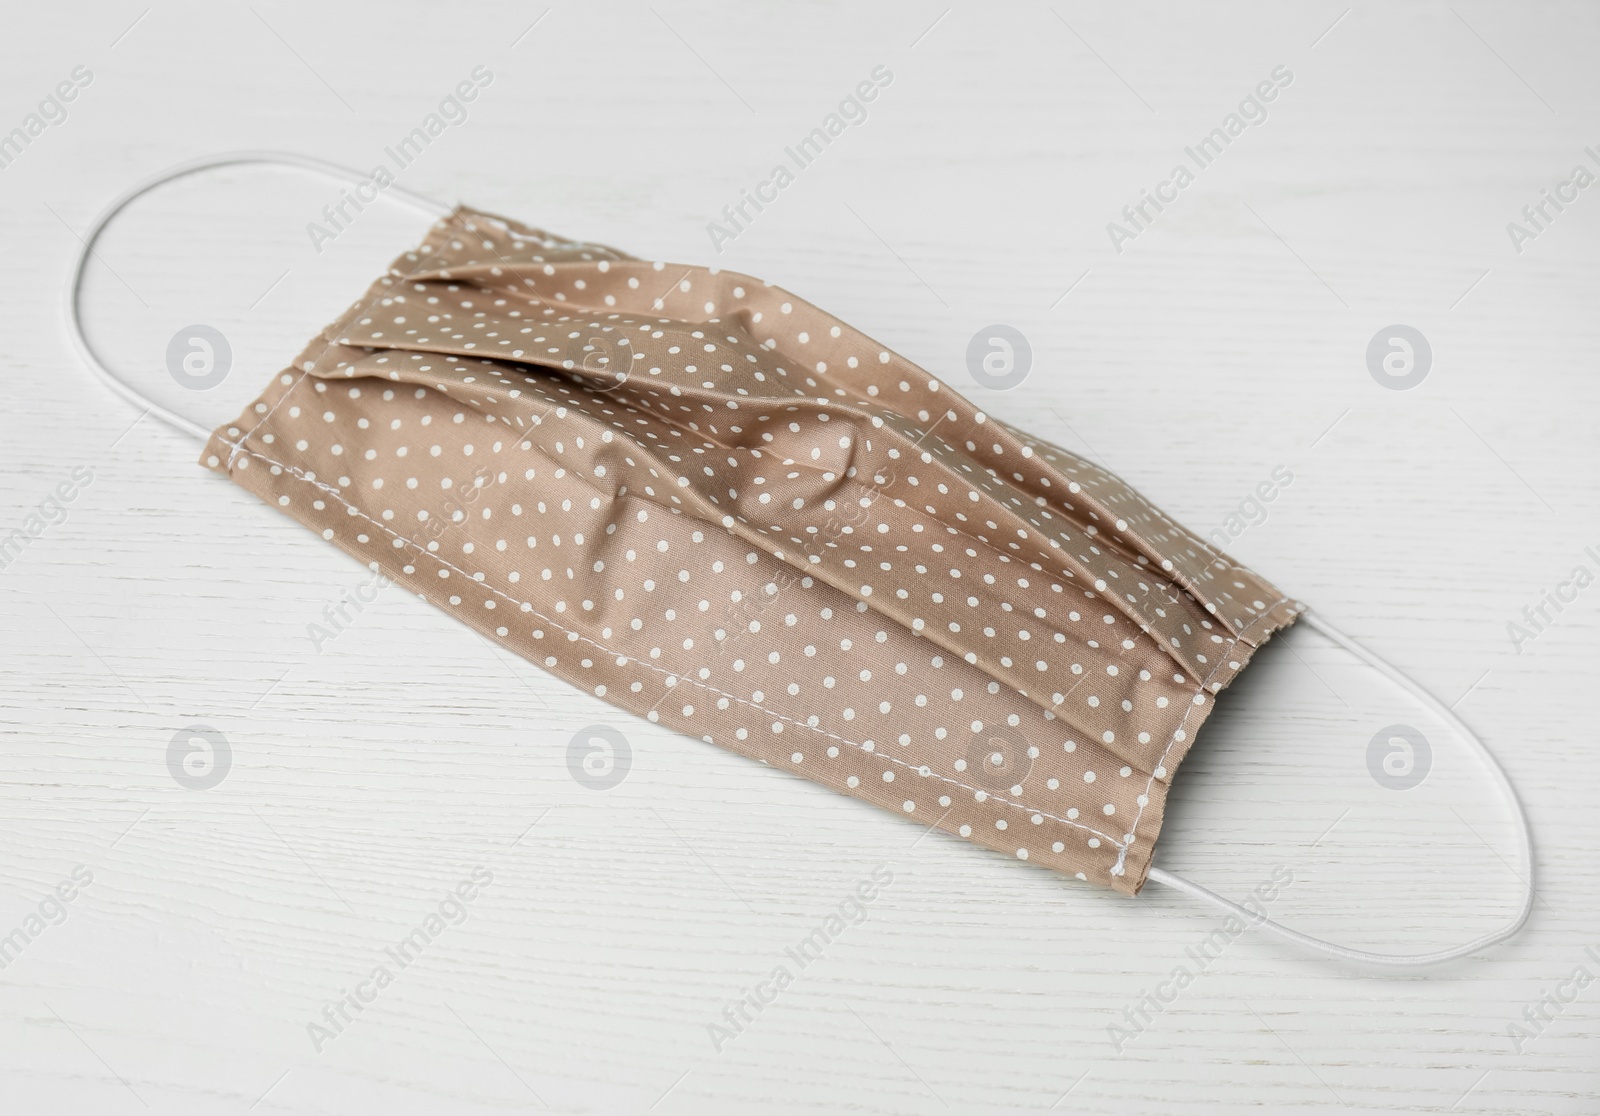 Photo of Handmade cloth mask on white wooden background. Personal protective equipment during COVID-19 pandemic